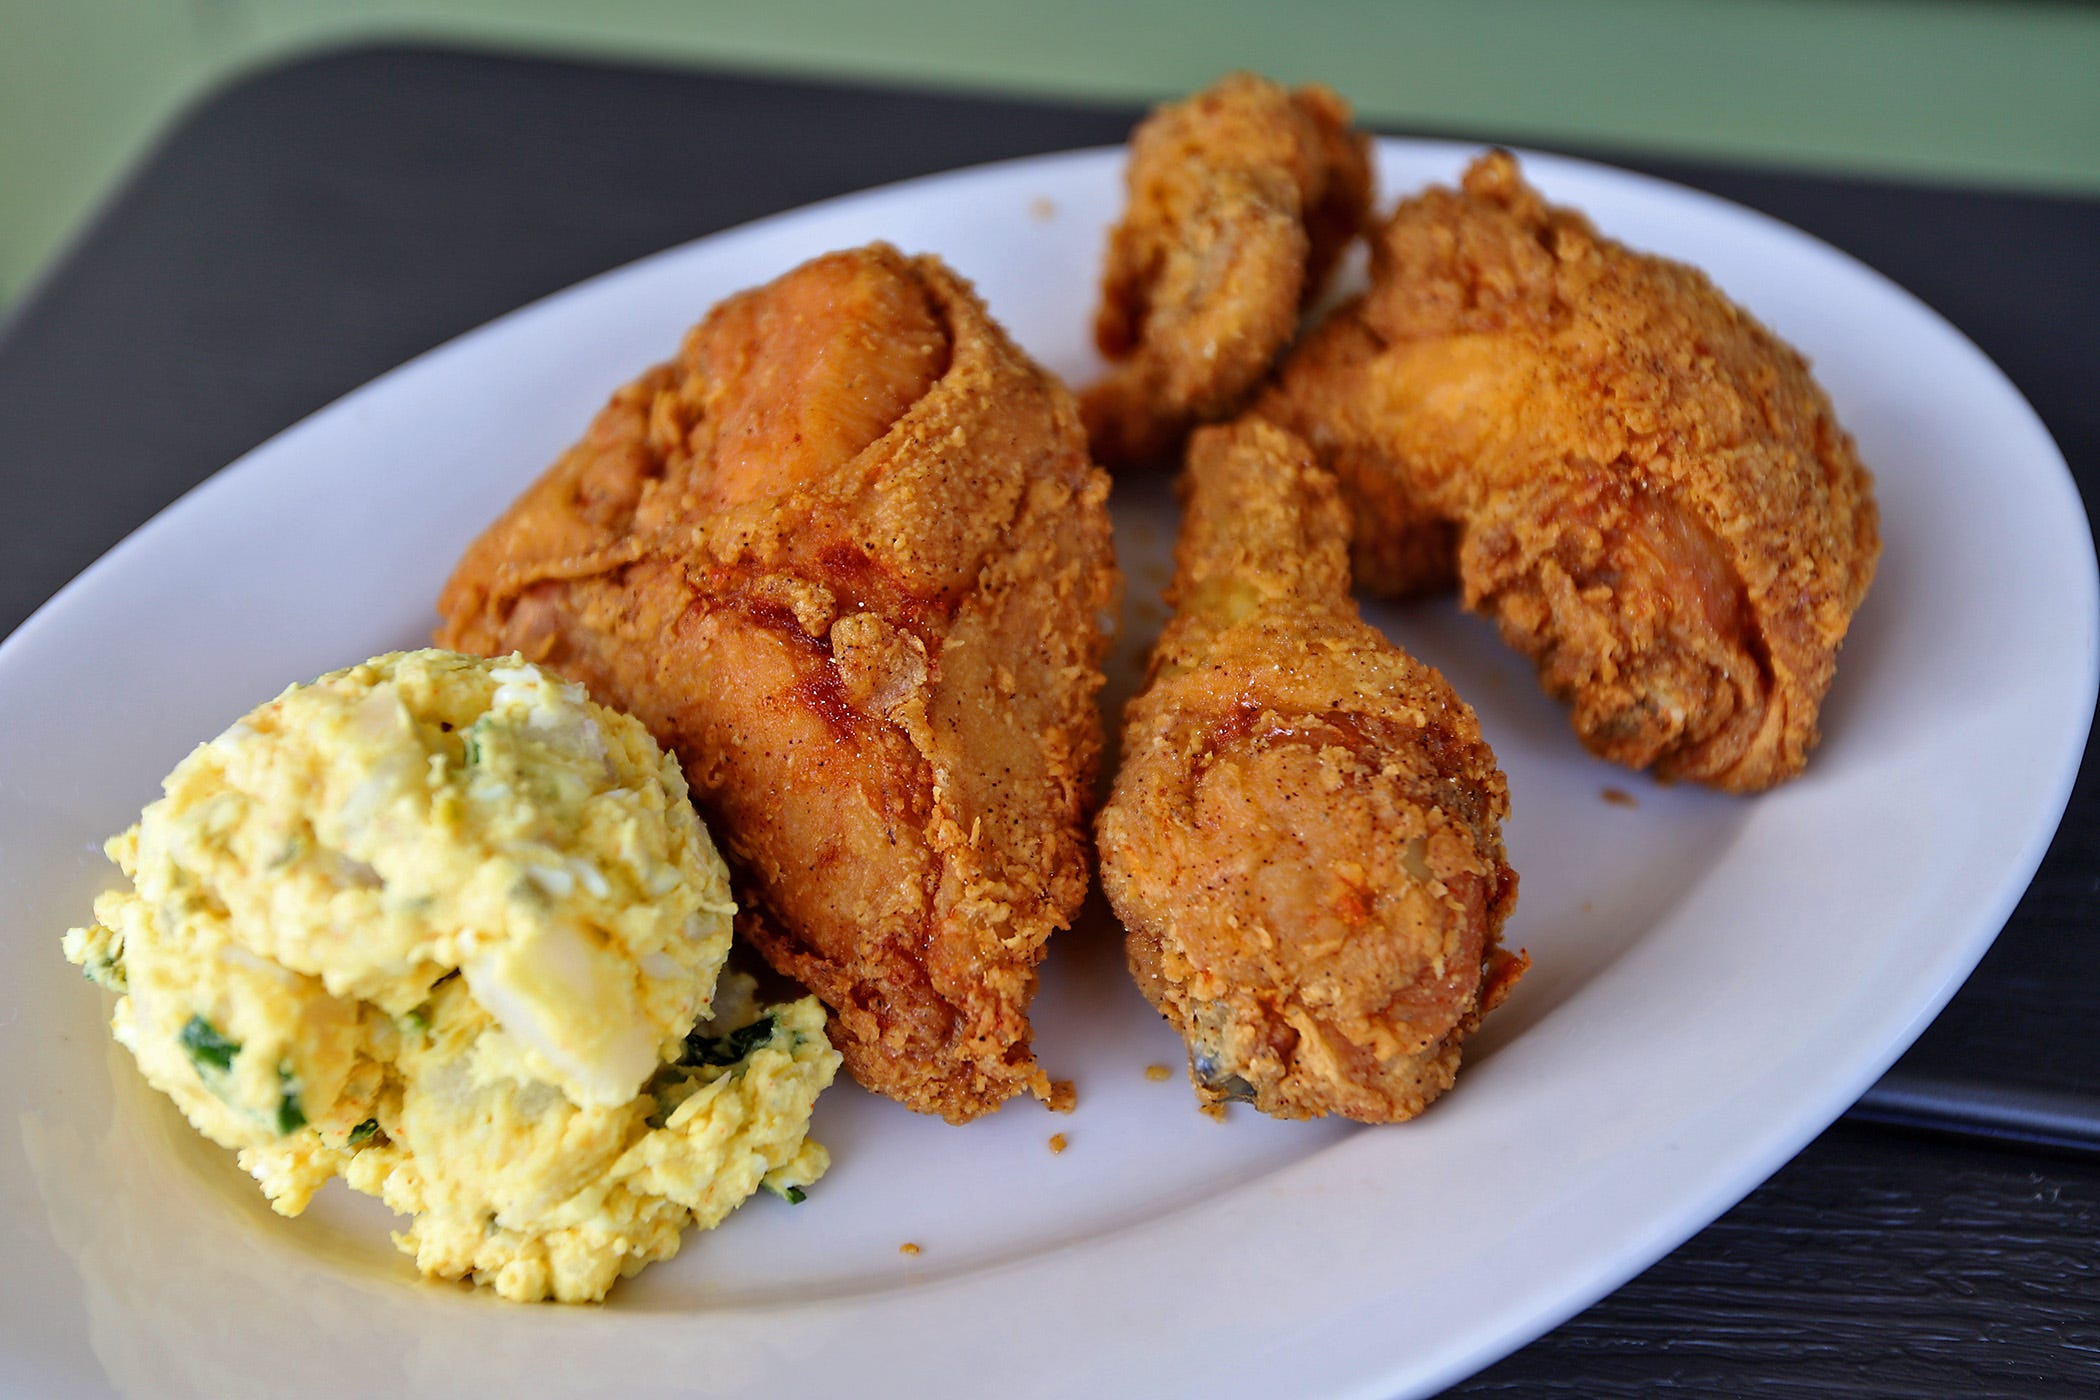 Fried chicken at Li'l Dizzy’s Cafe in the Treme neighborhood of New Orleans.